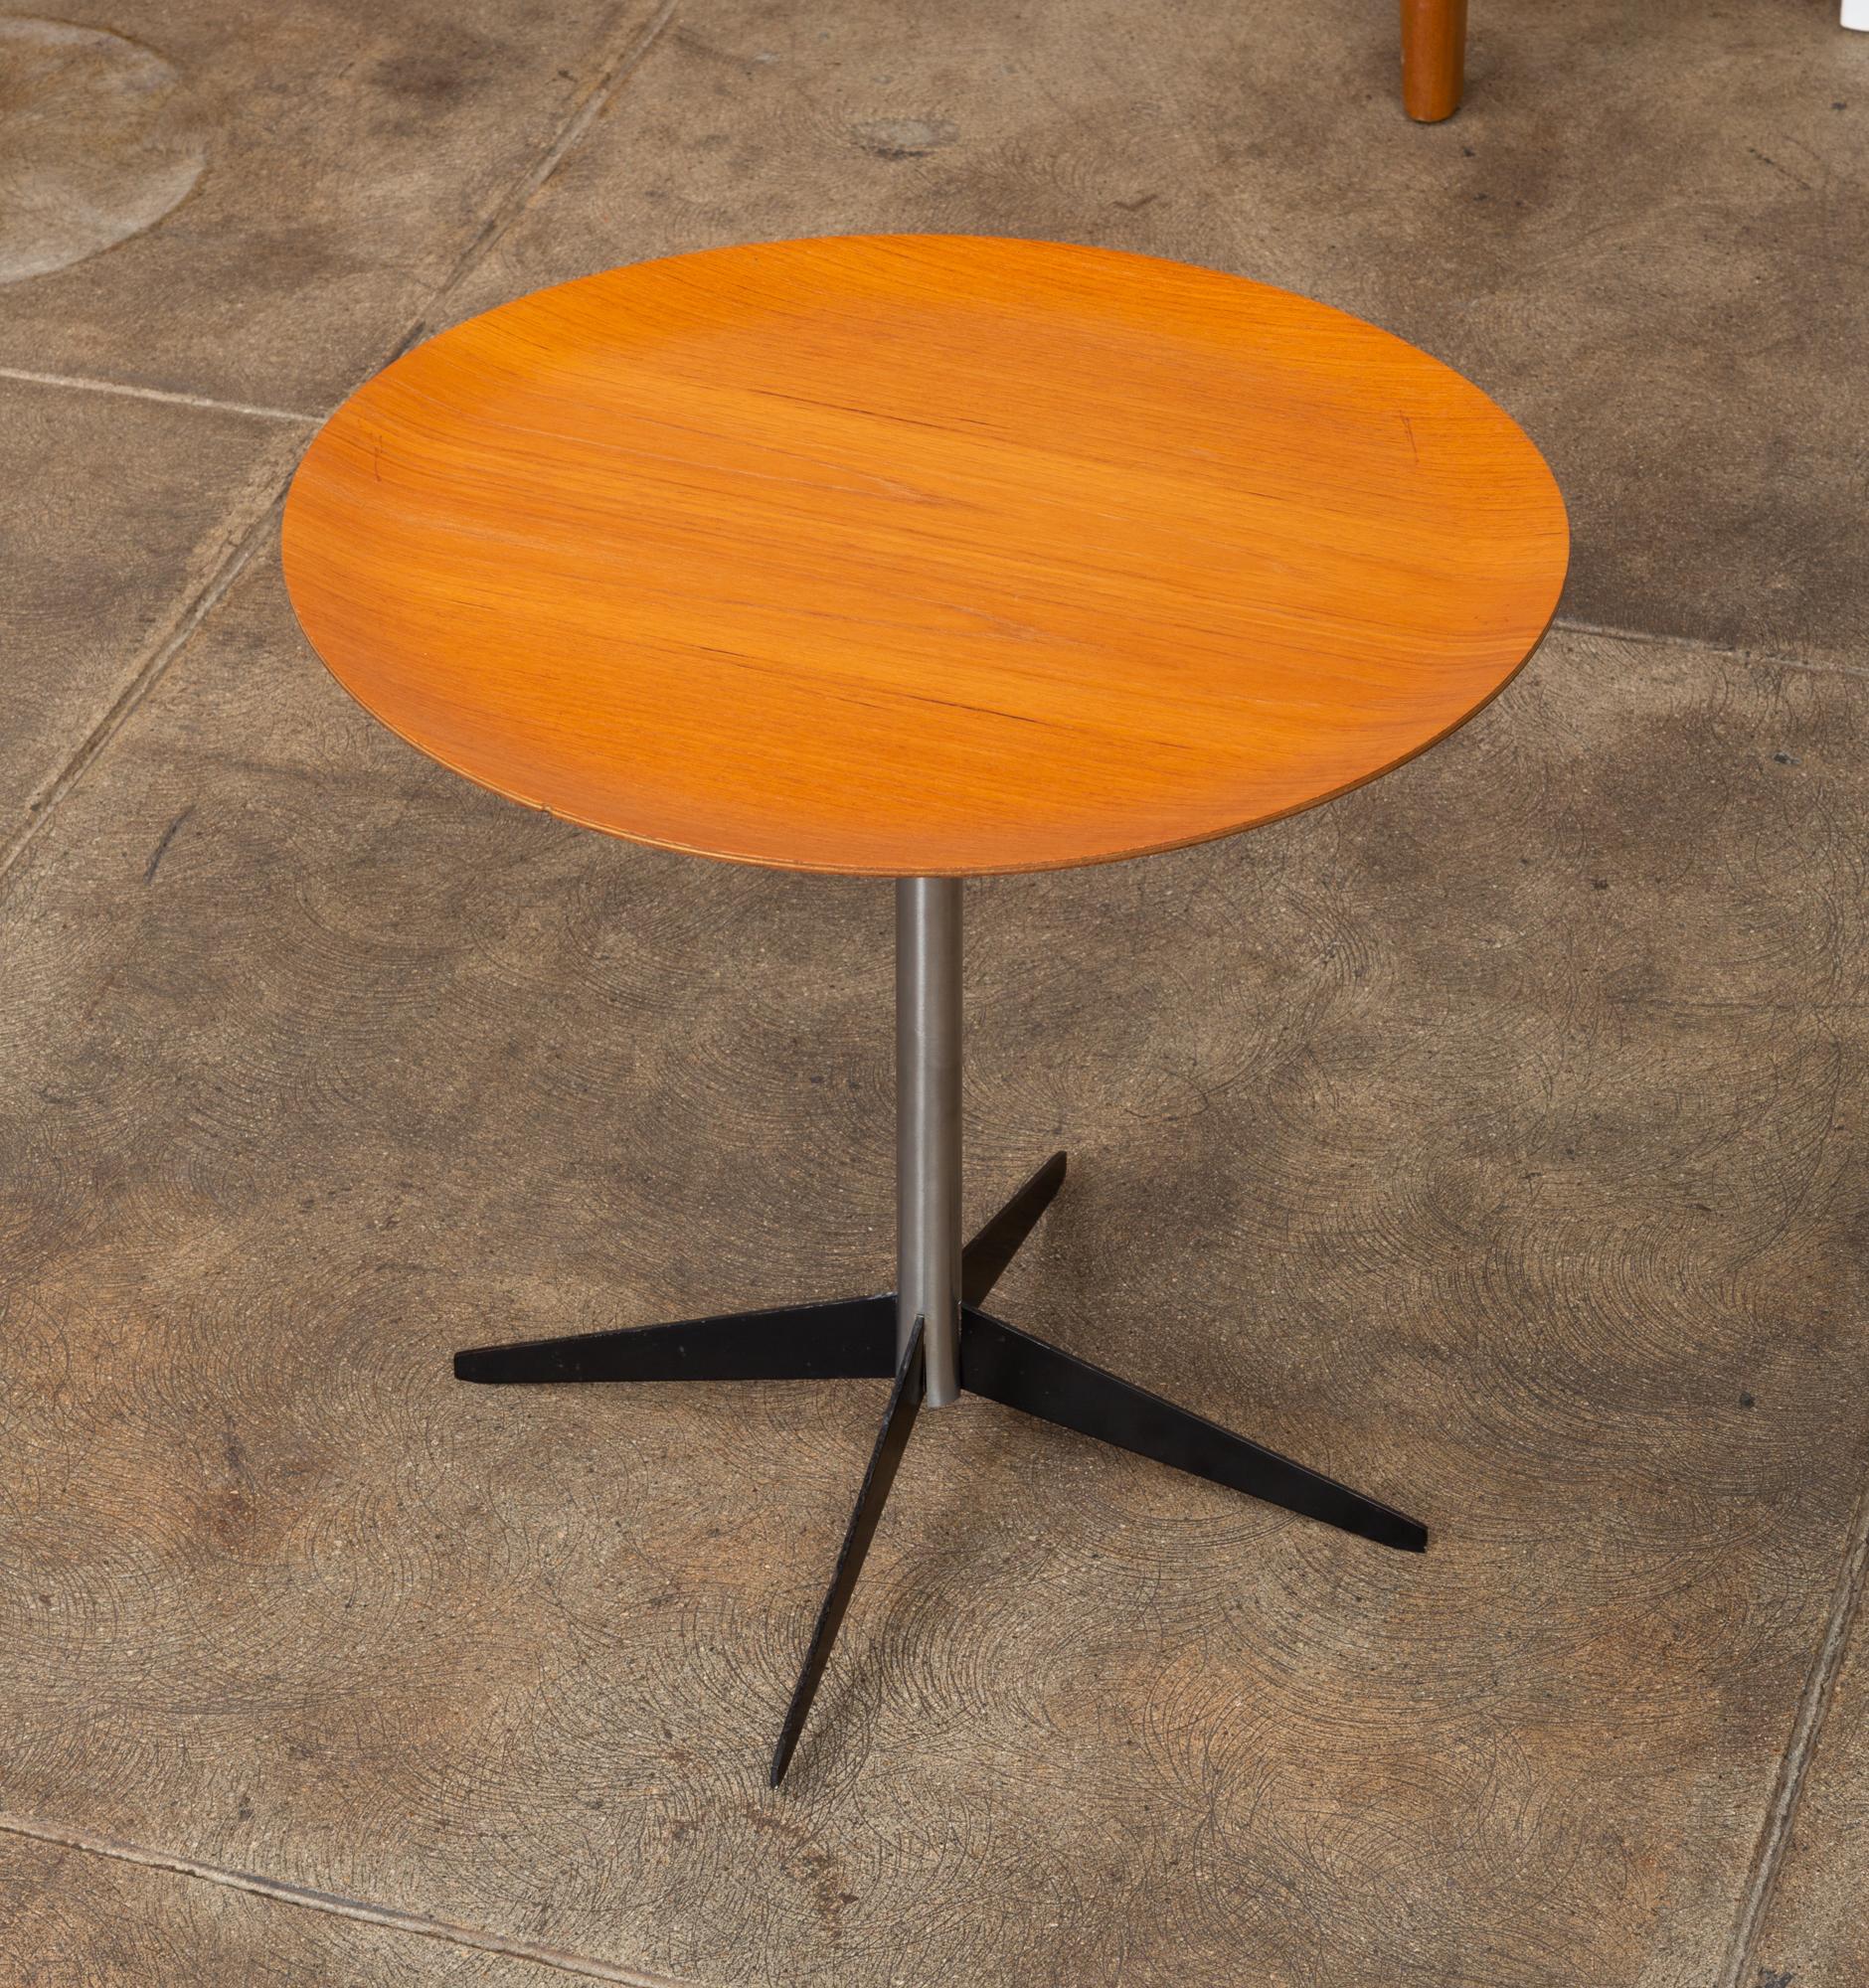 Rare George Nelson for Herman Miller drinks table. This Minimalist side table features a round walnut plywood top, nickel plated steel tube base, with four enameled steel fin legs.

Condition: Excellent vintage condition; professionally cleaned